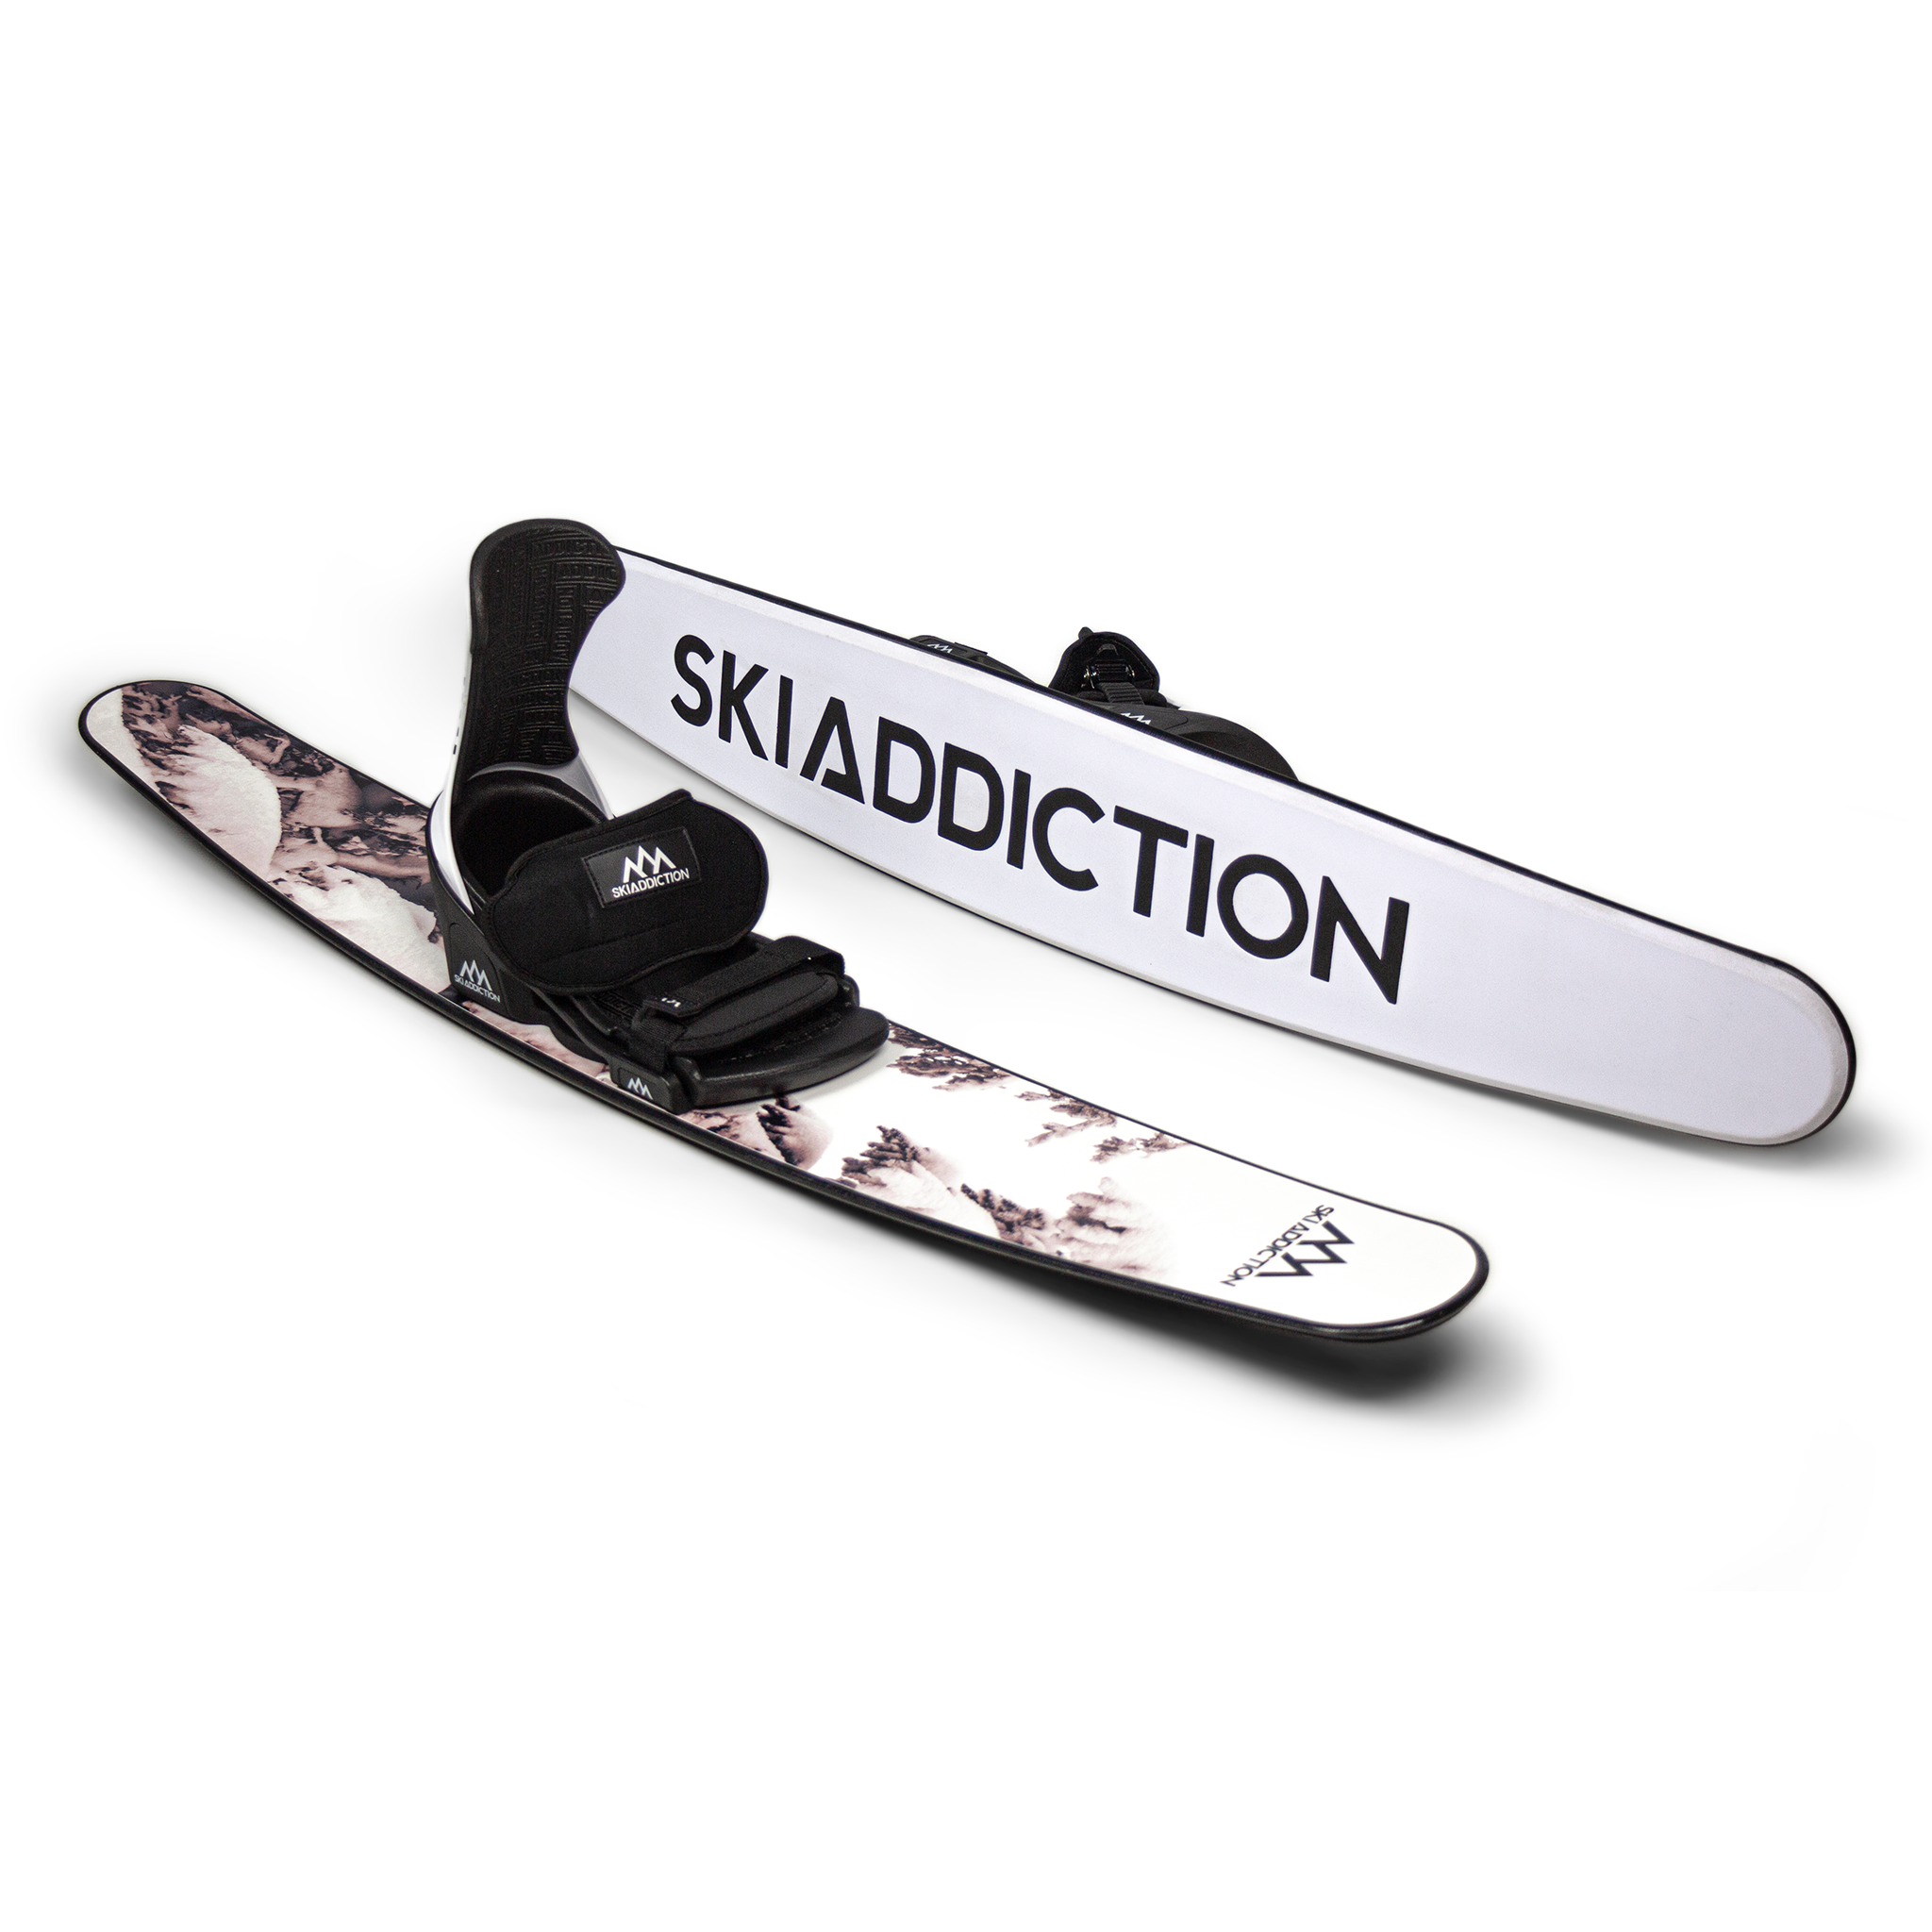 The Best Way to Ship Your Skis, Snowboard & Equipment